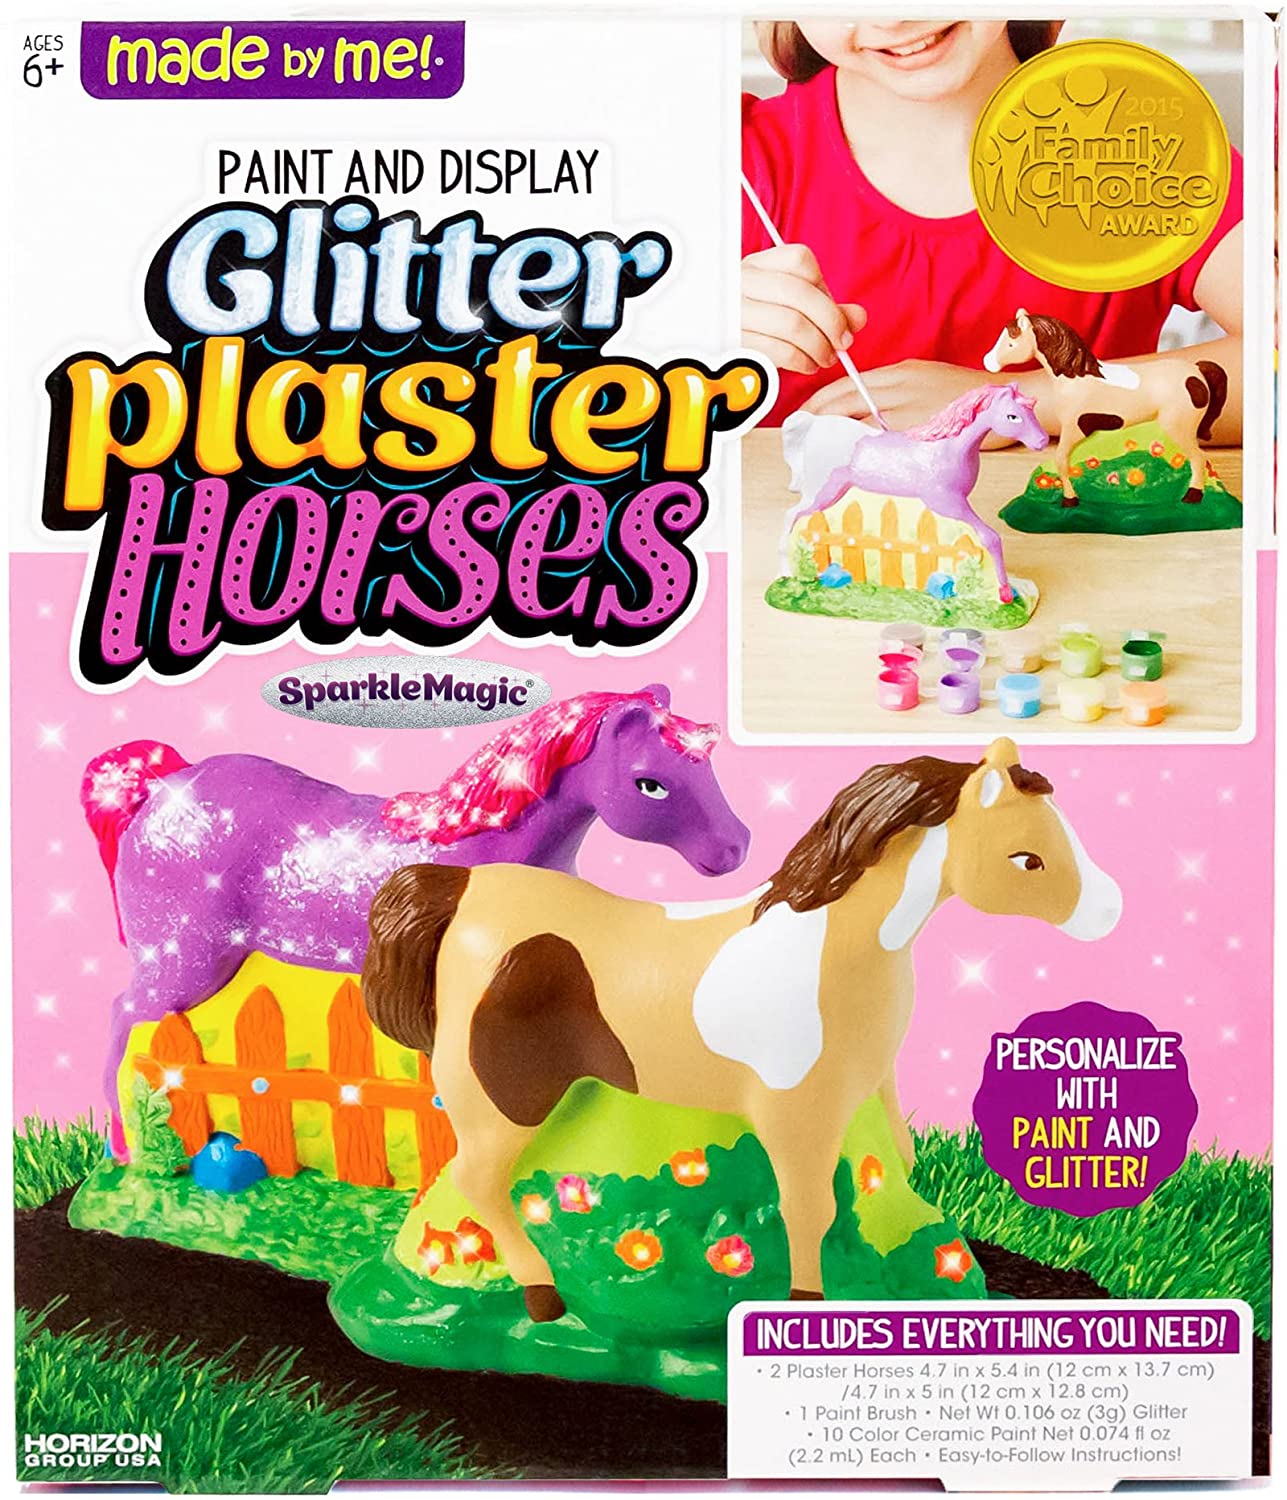 Horizon Made By Me Paint & Display Glitter Plaster Horse Craft Ages 6 NIB 